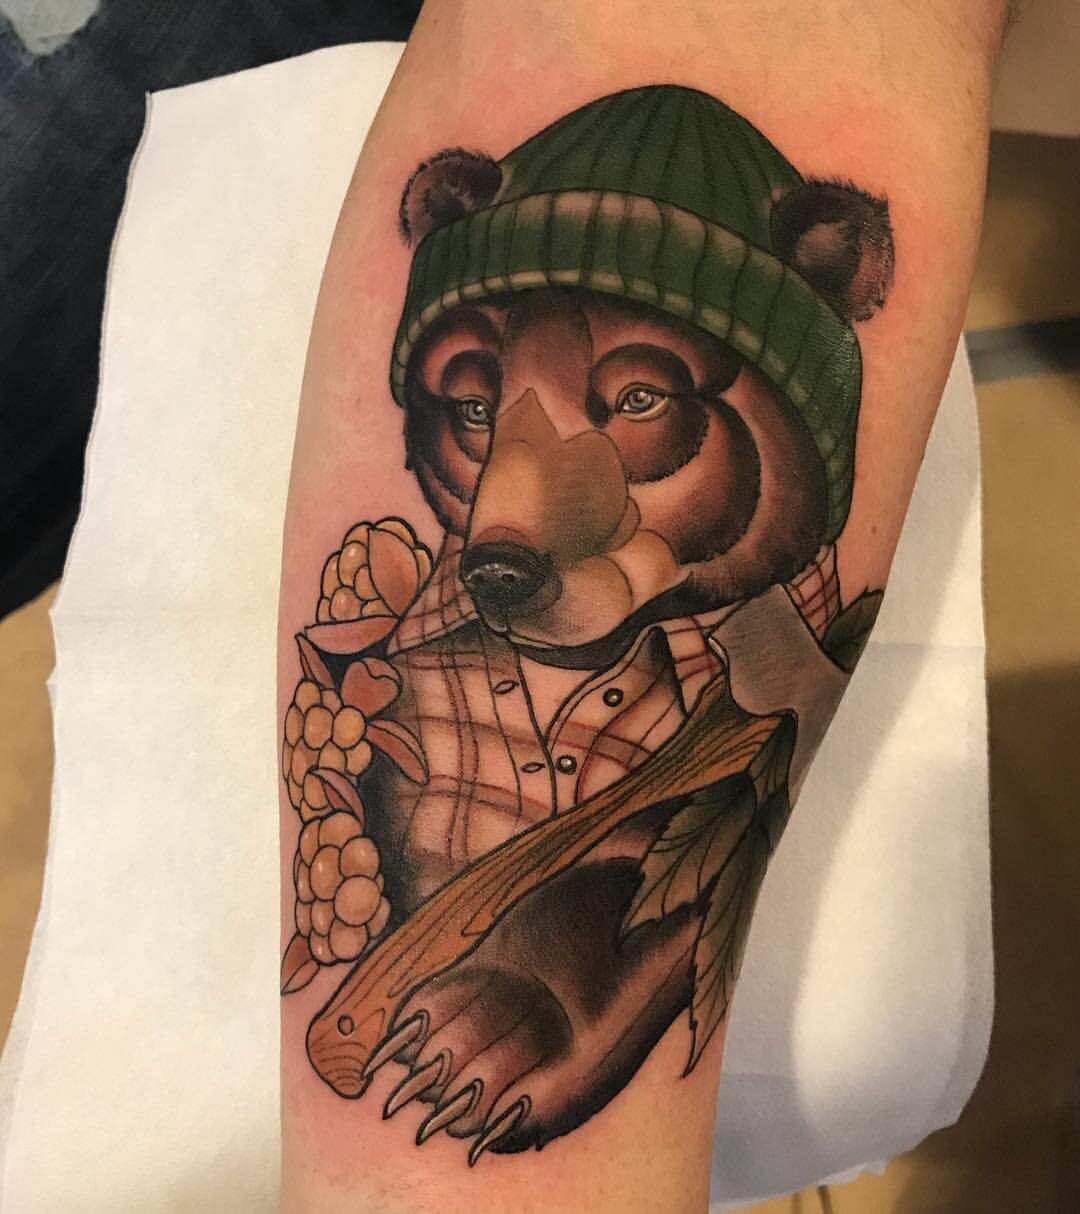 Tattoo uploaded by Craig Kelly  Traditional old school bear tattoo by  Craig Kelly  Tattoodo